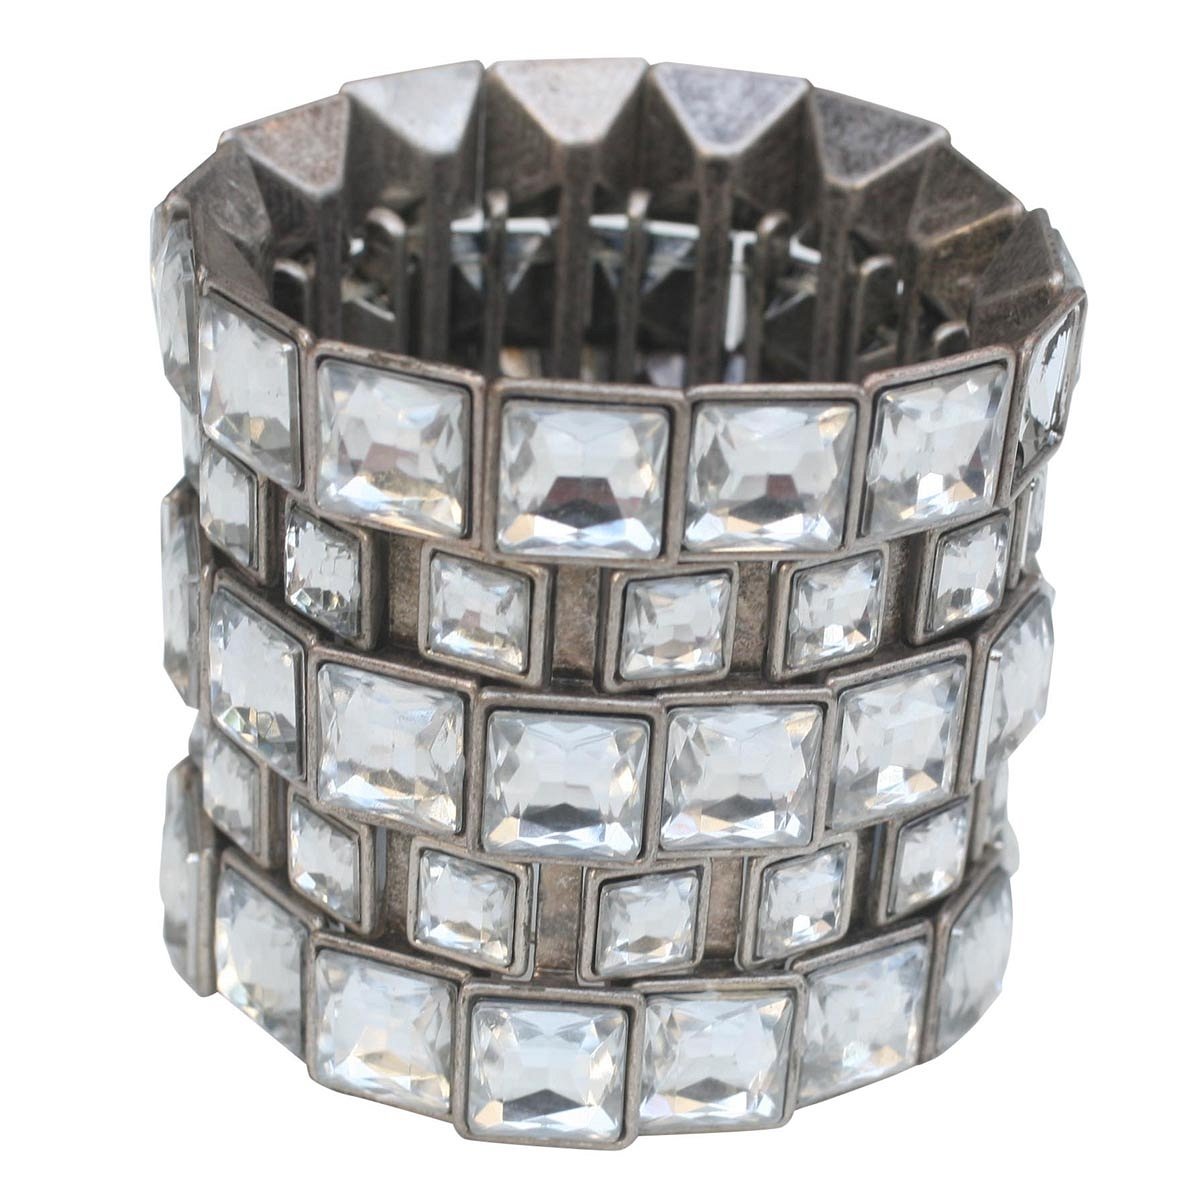 Substantial 5-Row shifted large and small square shape crystal embedded stretch bracelet